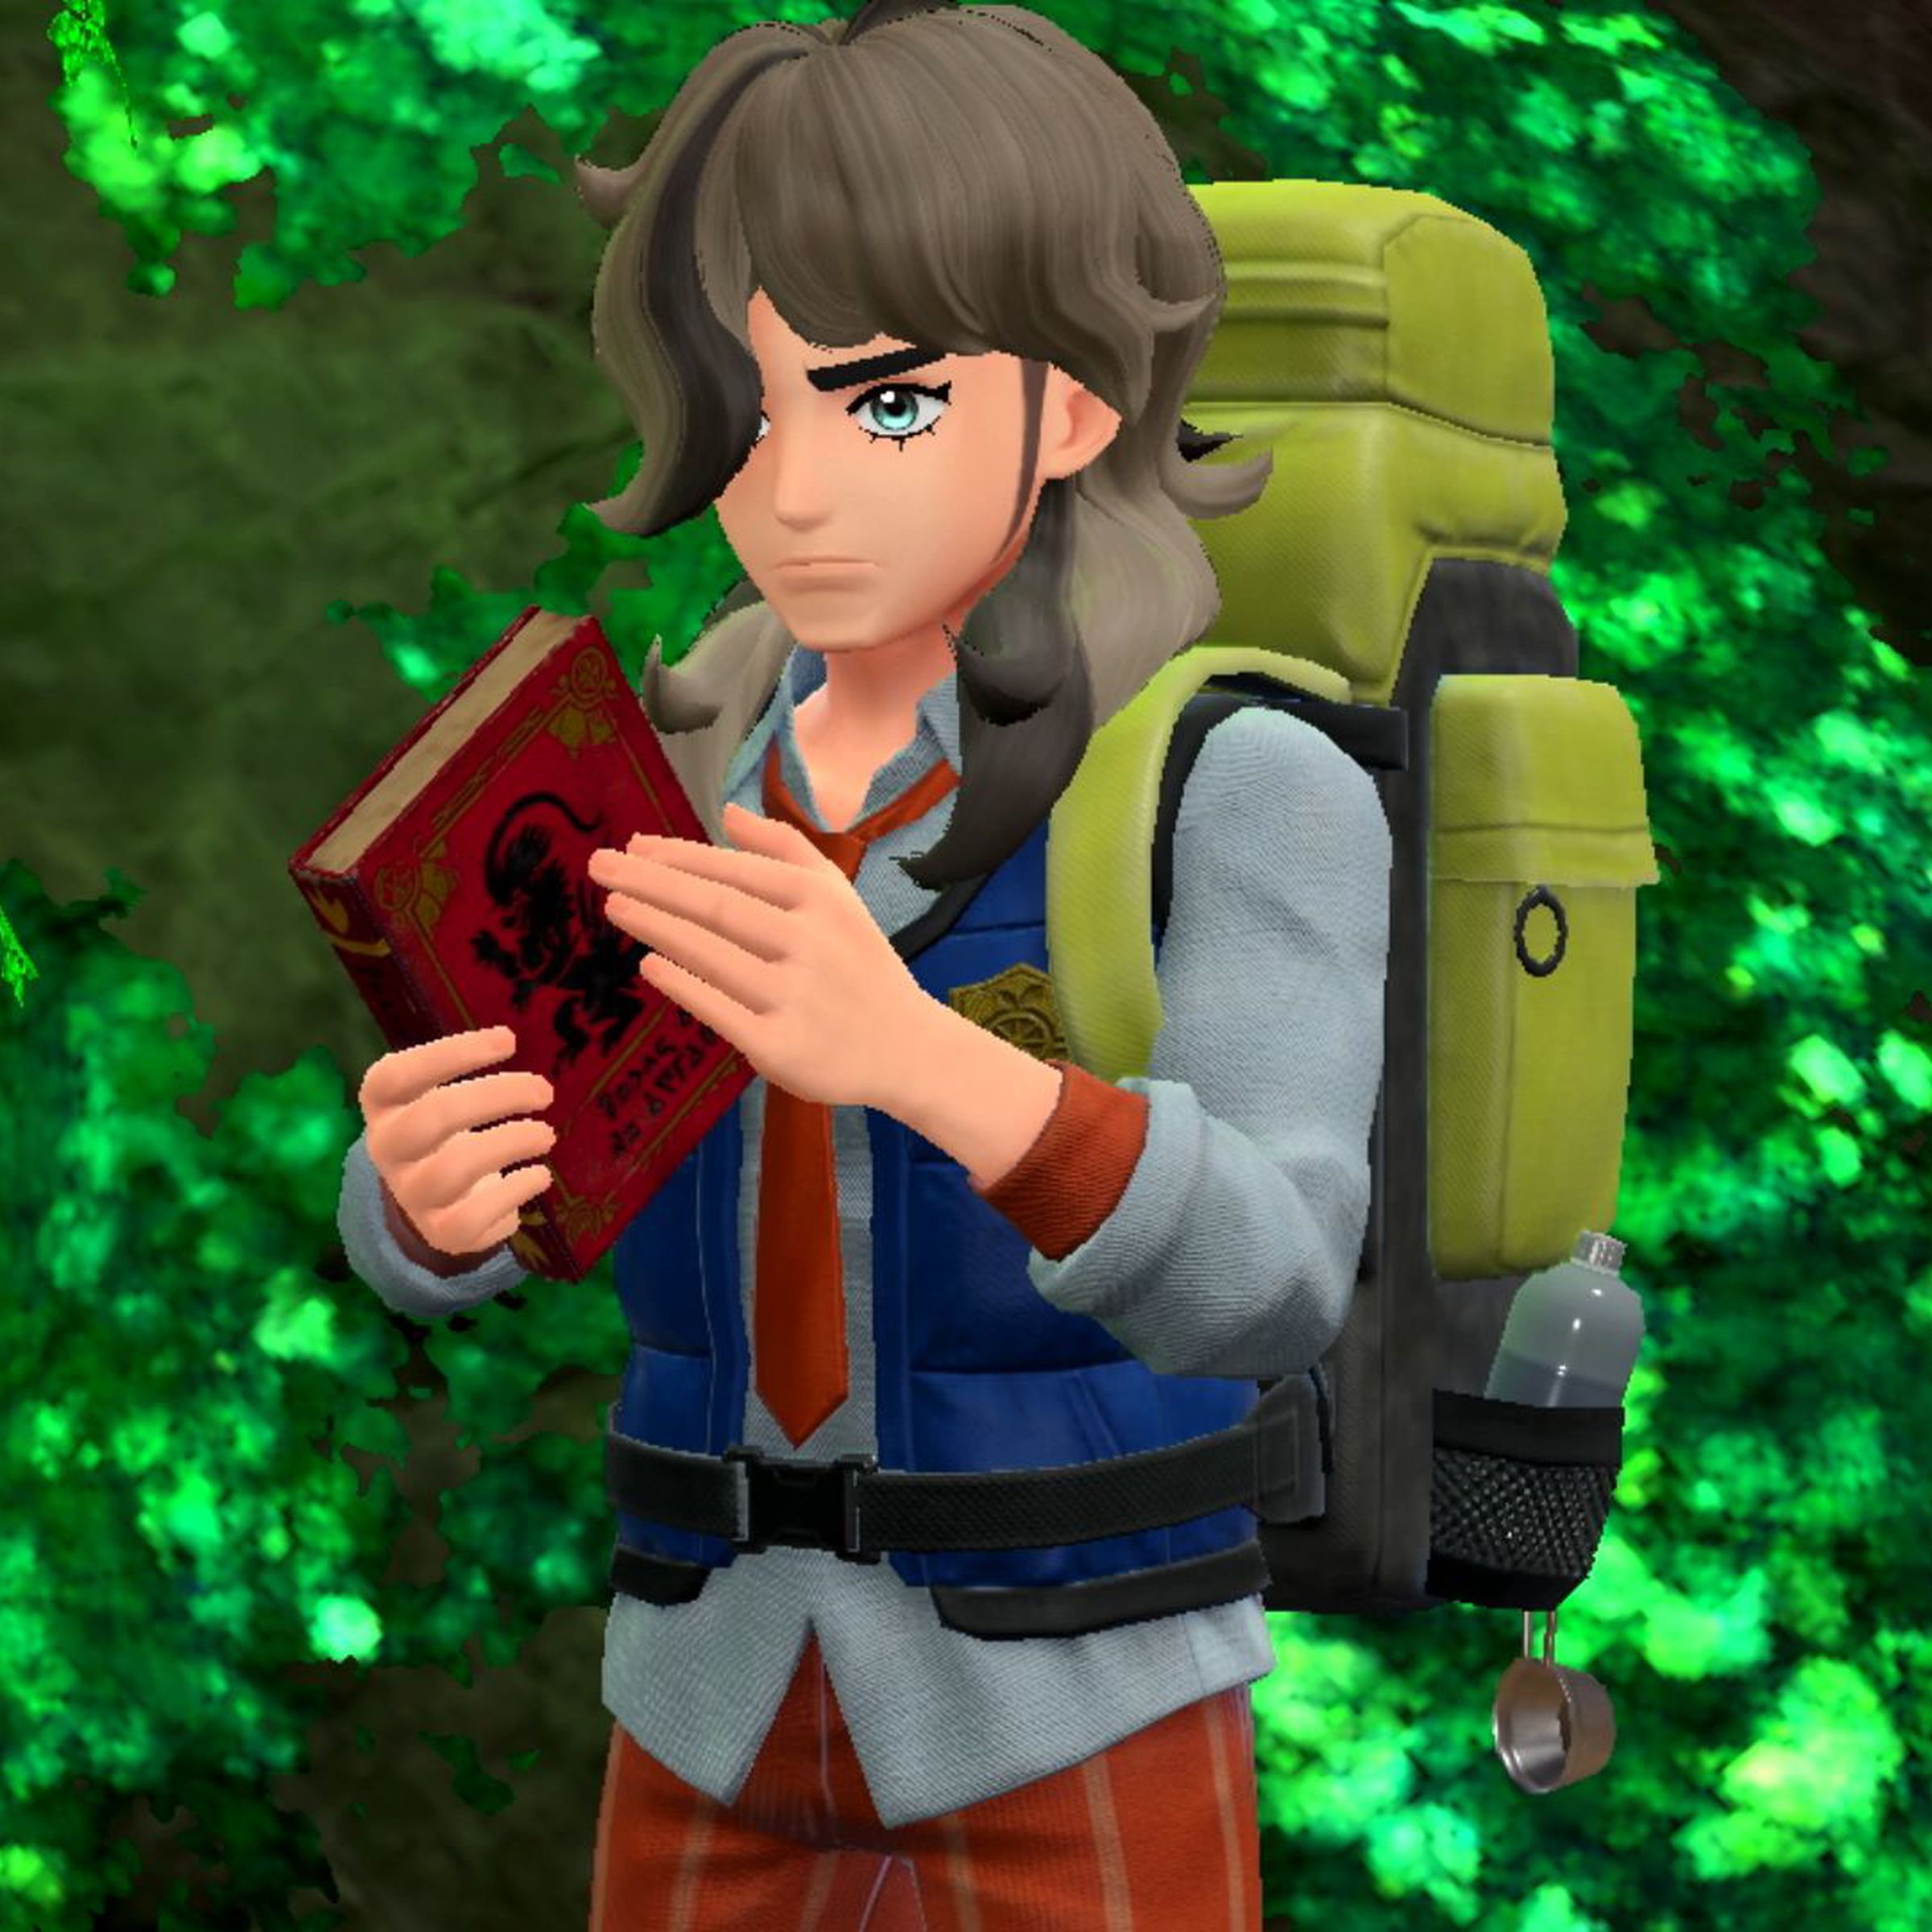 A screenshot from Pokémon Scarlet and Violet.